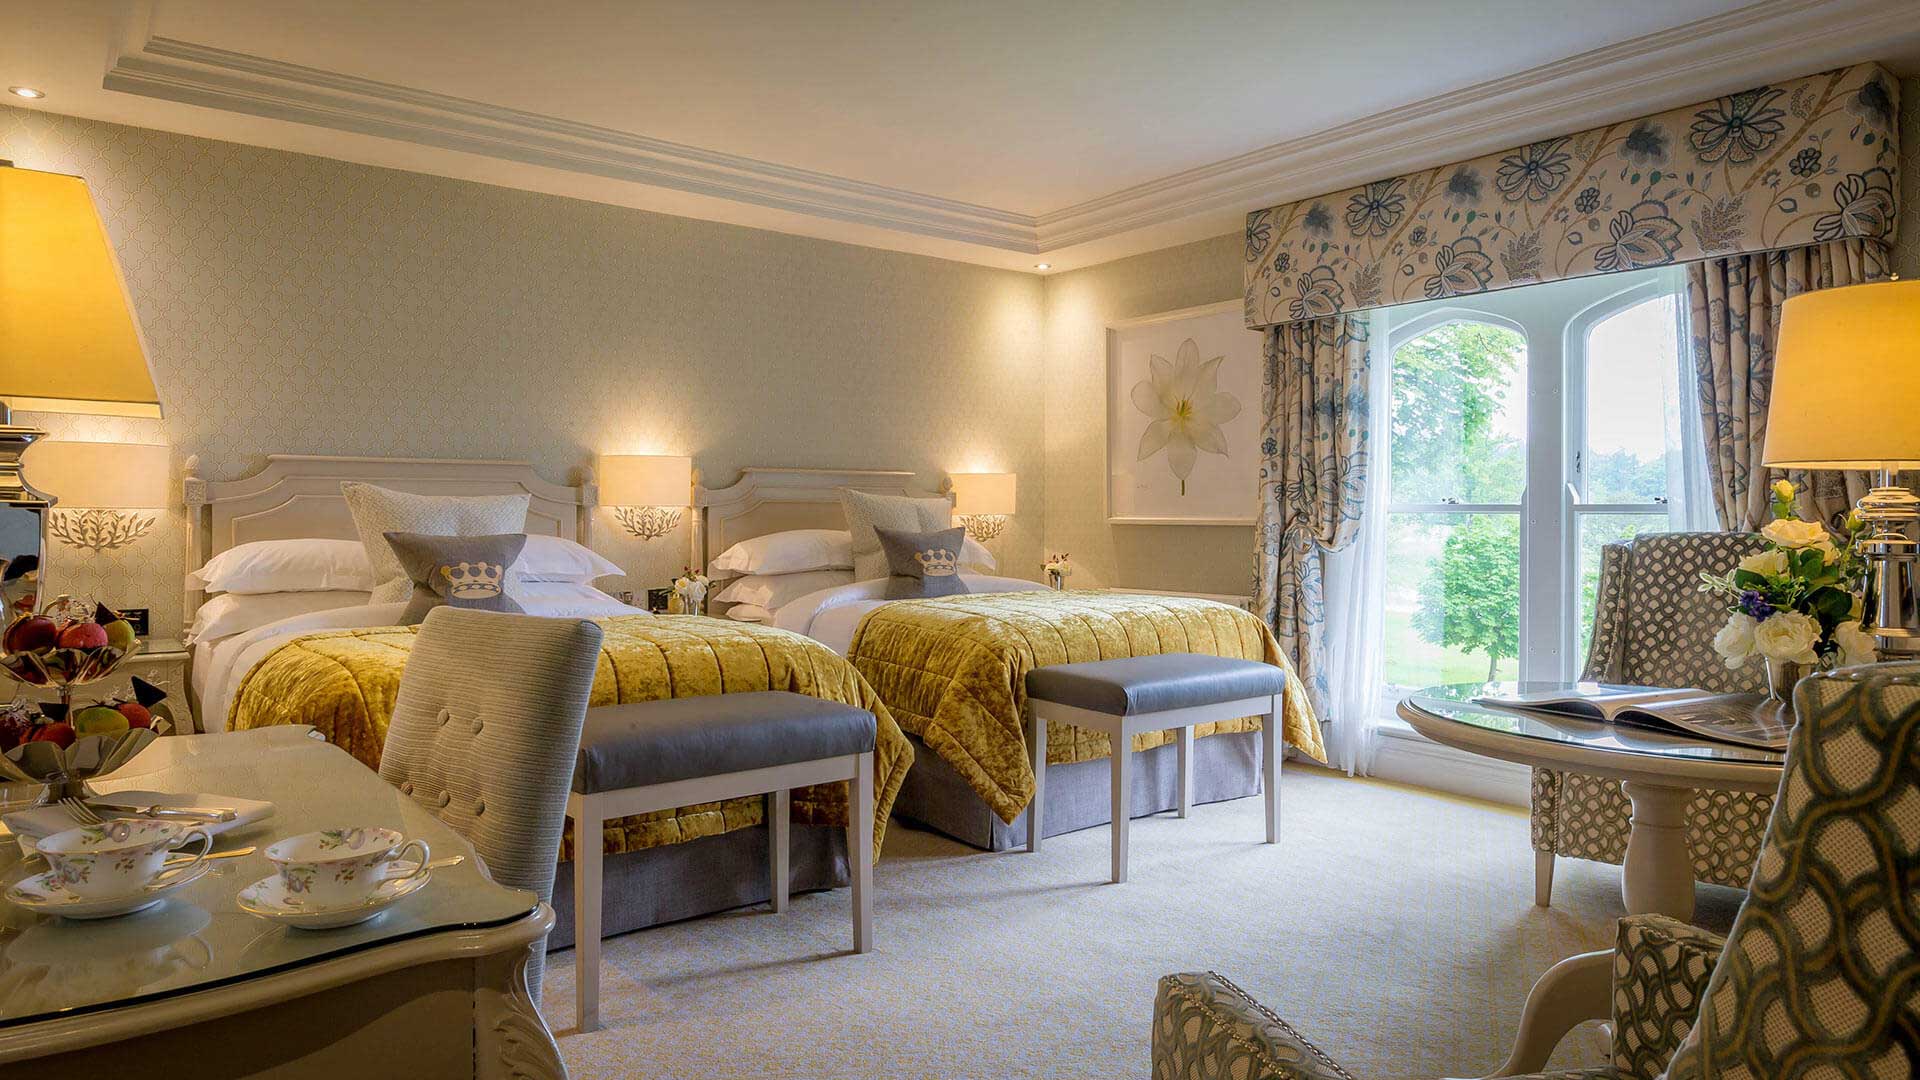 Deluxe Rooms 5 Star Luxury Accommodation Dromoland Castle